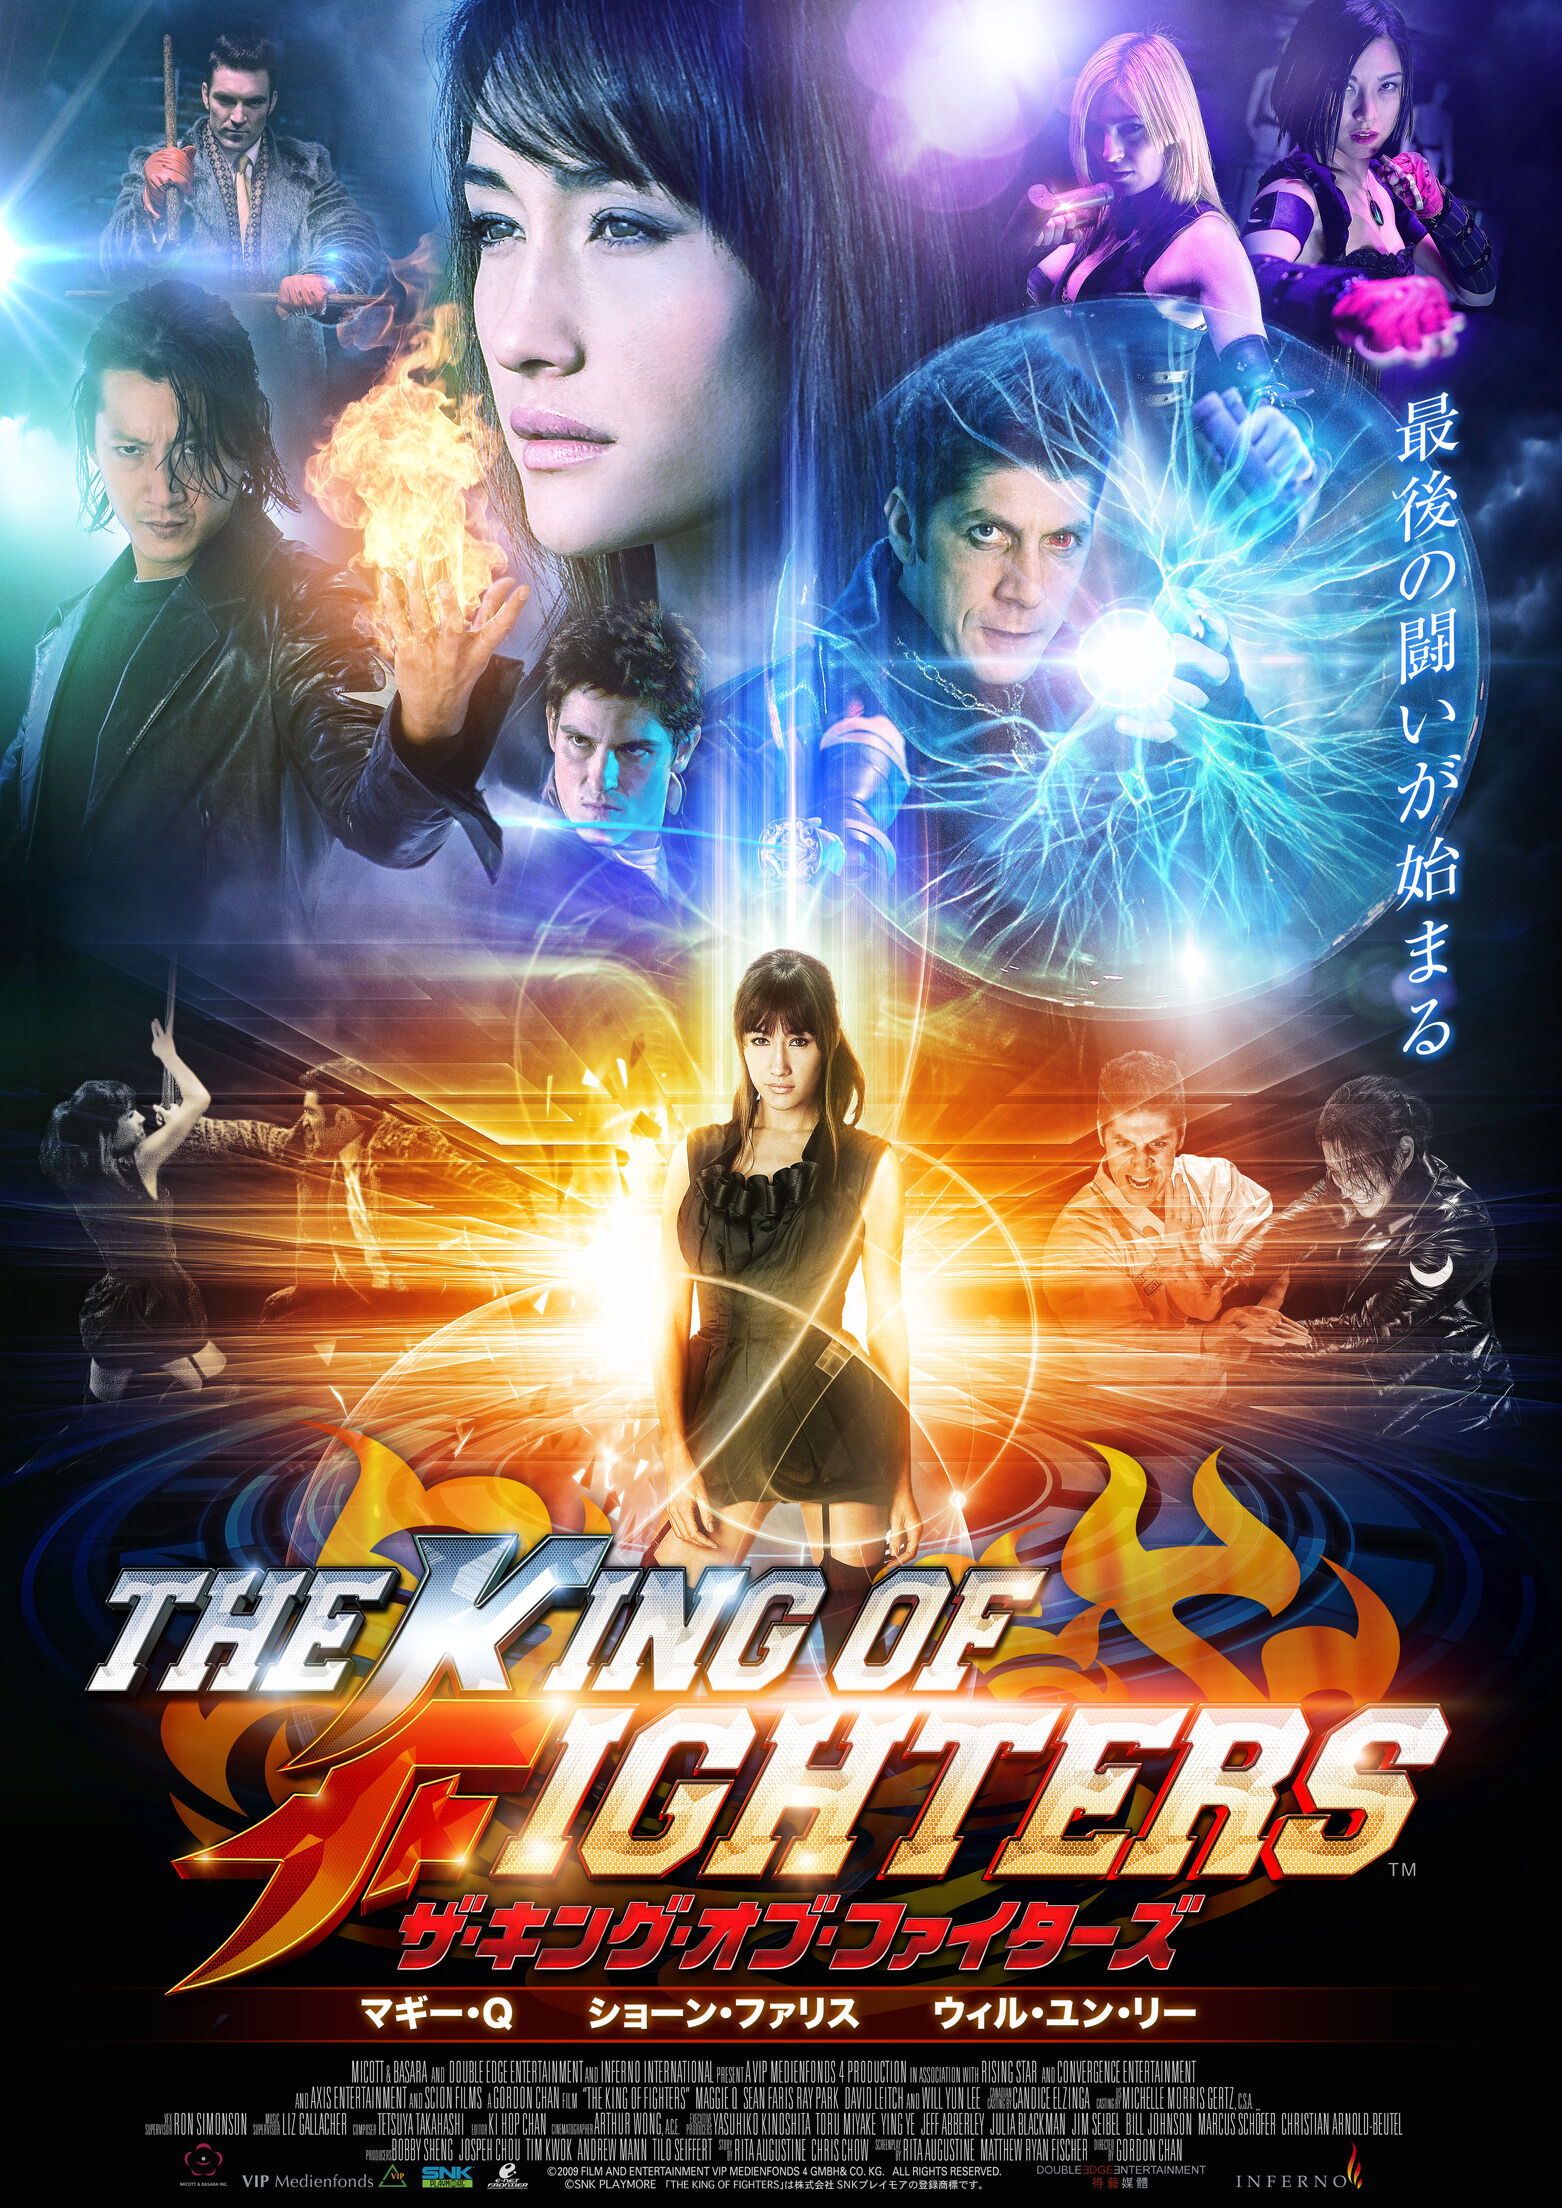 Check out the trailer for the King of Fighters movie